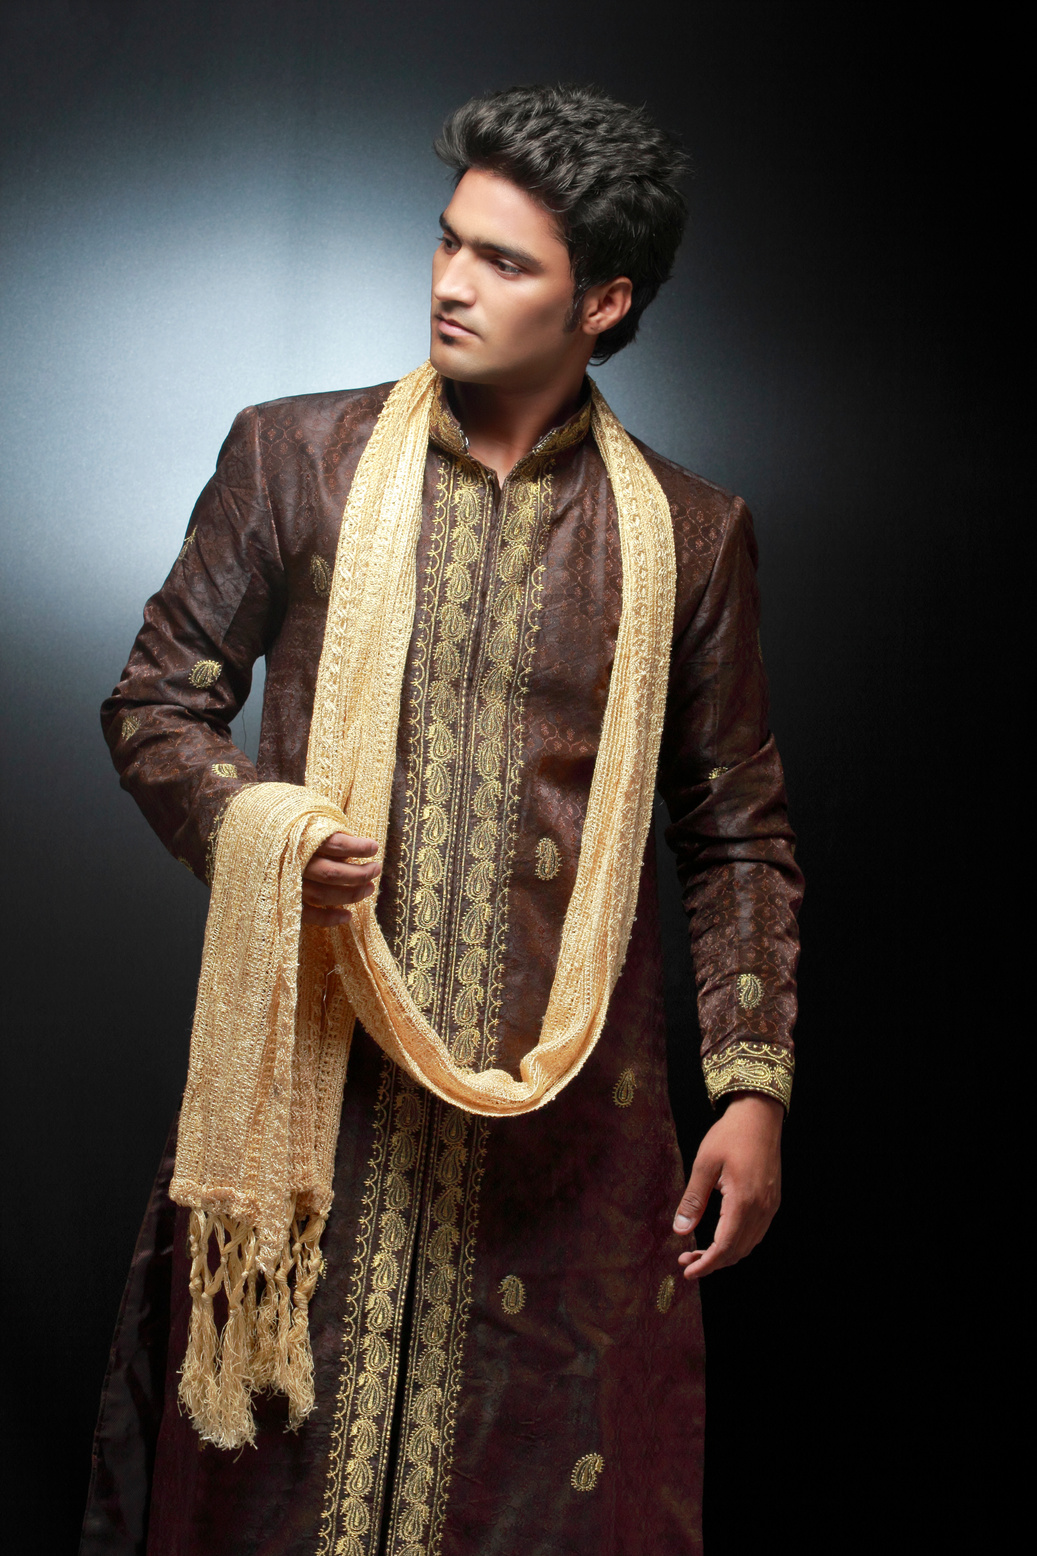 Man in Traditional Indian Clothing